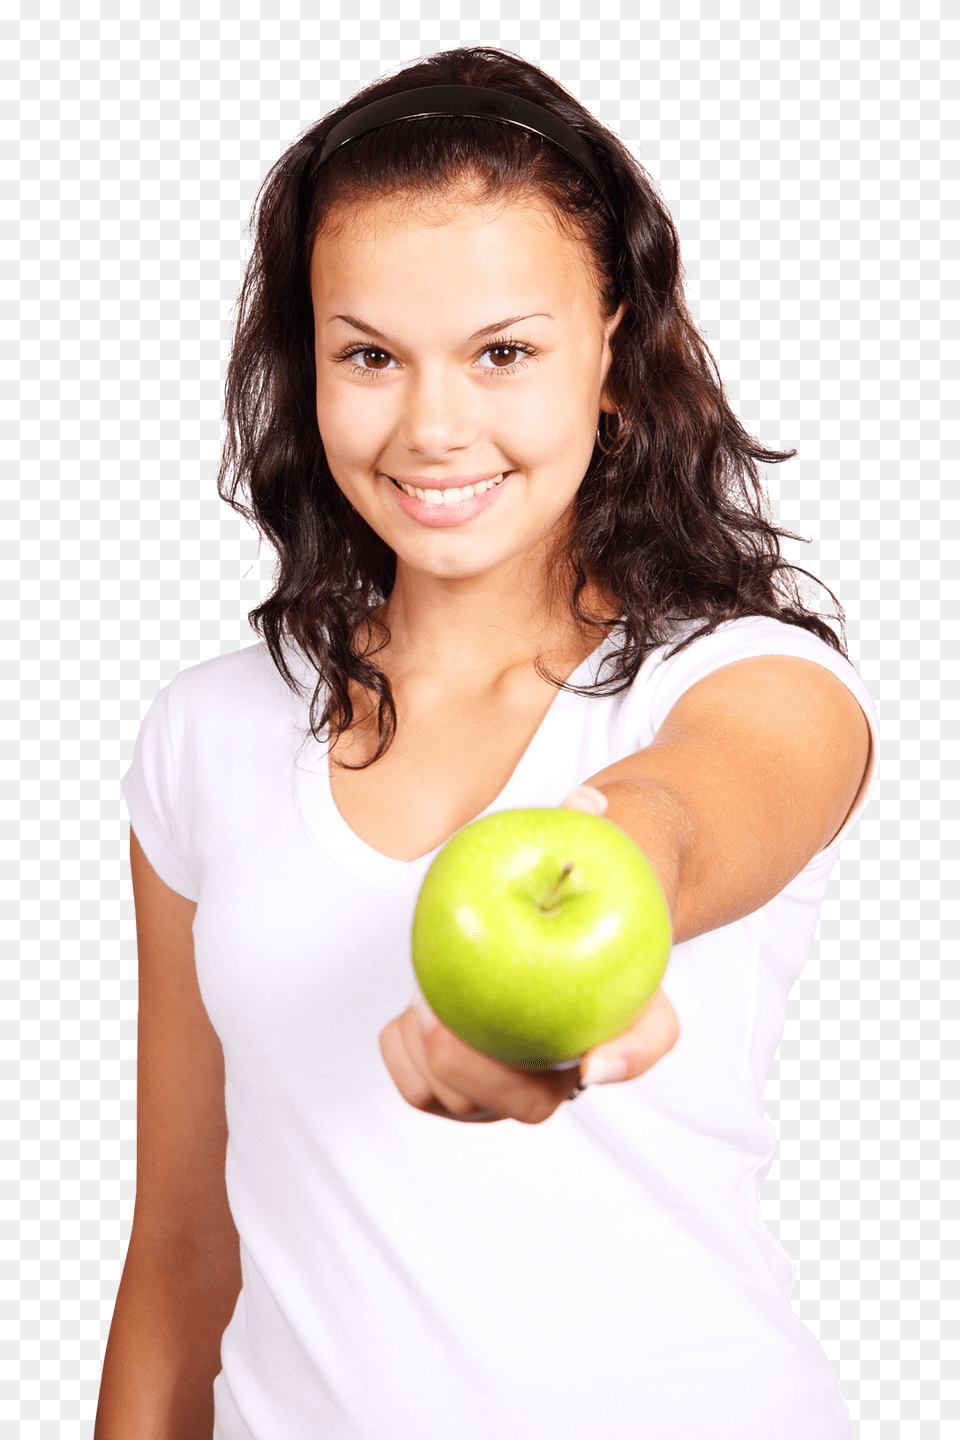 Girl Holding Apple Image, Adult, Produce, Plant, Person Png